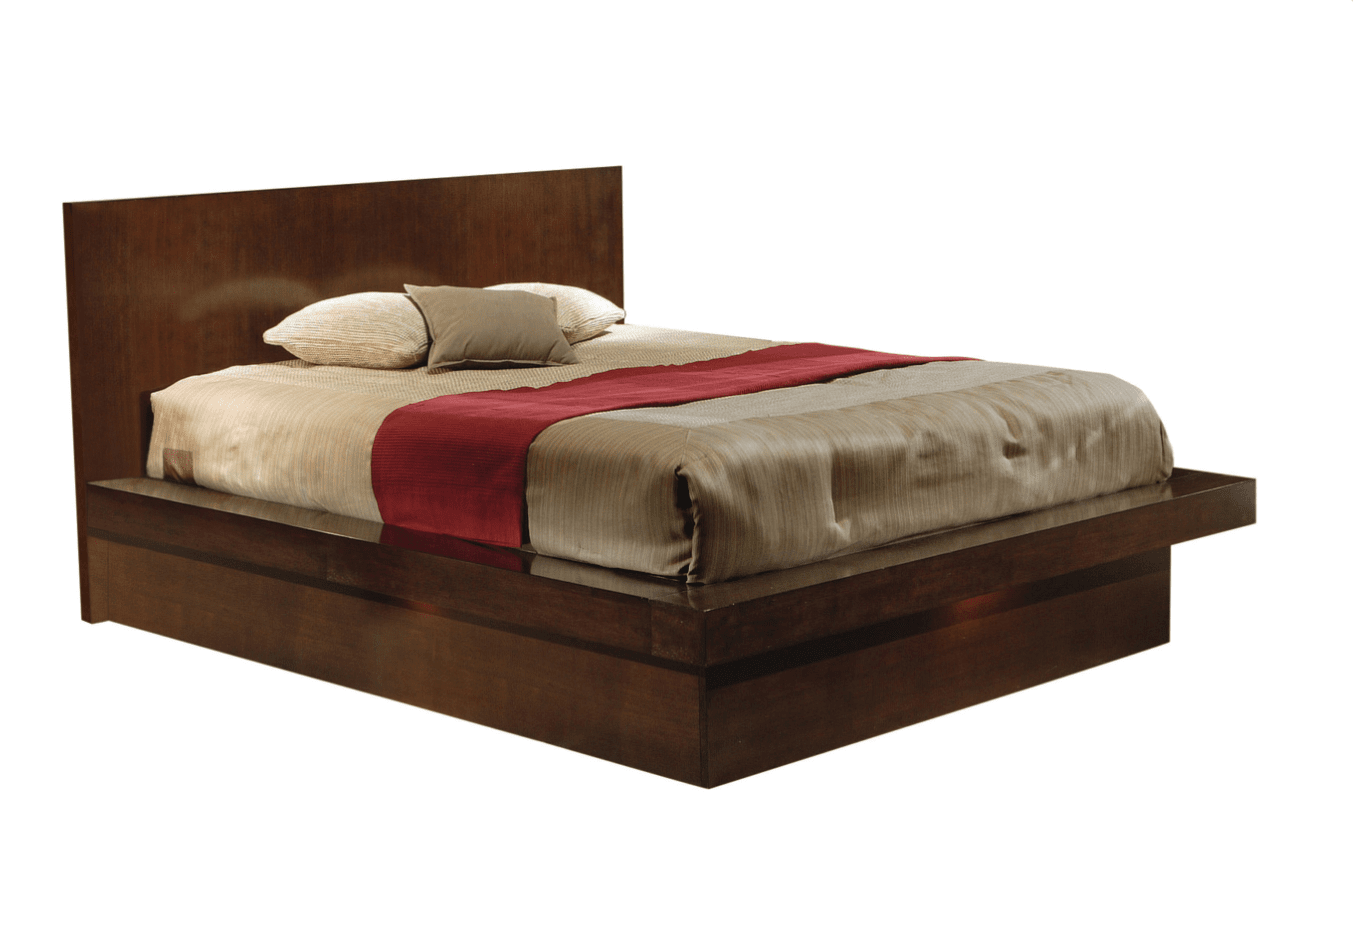 Jessica Queen Platform Bed With Rail Seating in Cappuccino